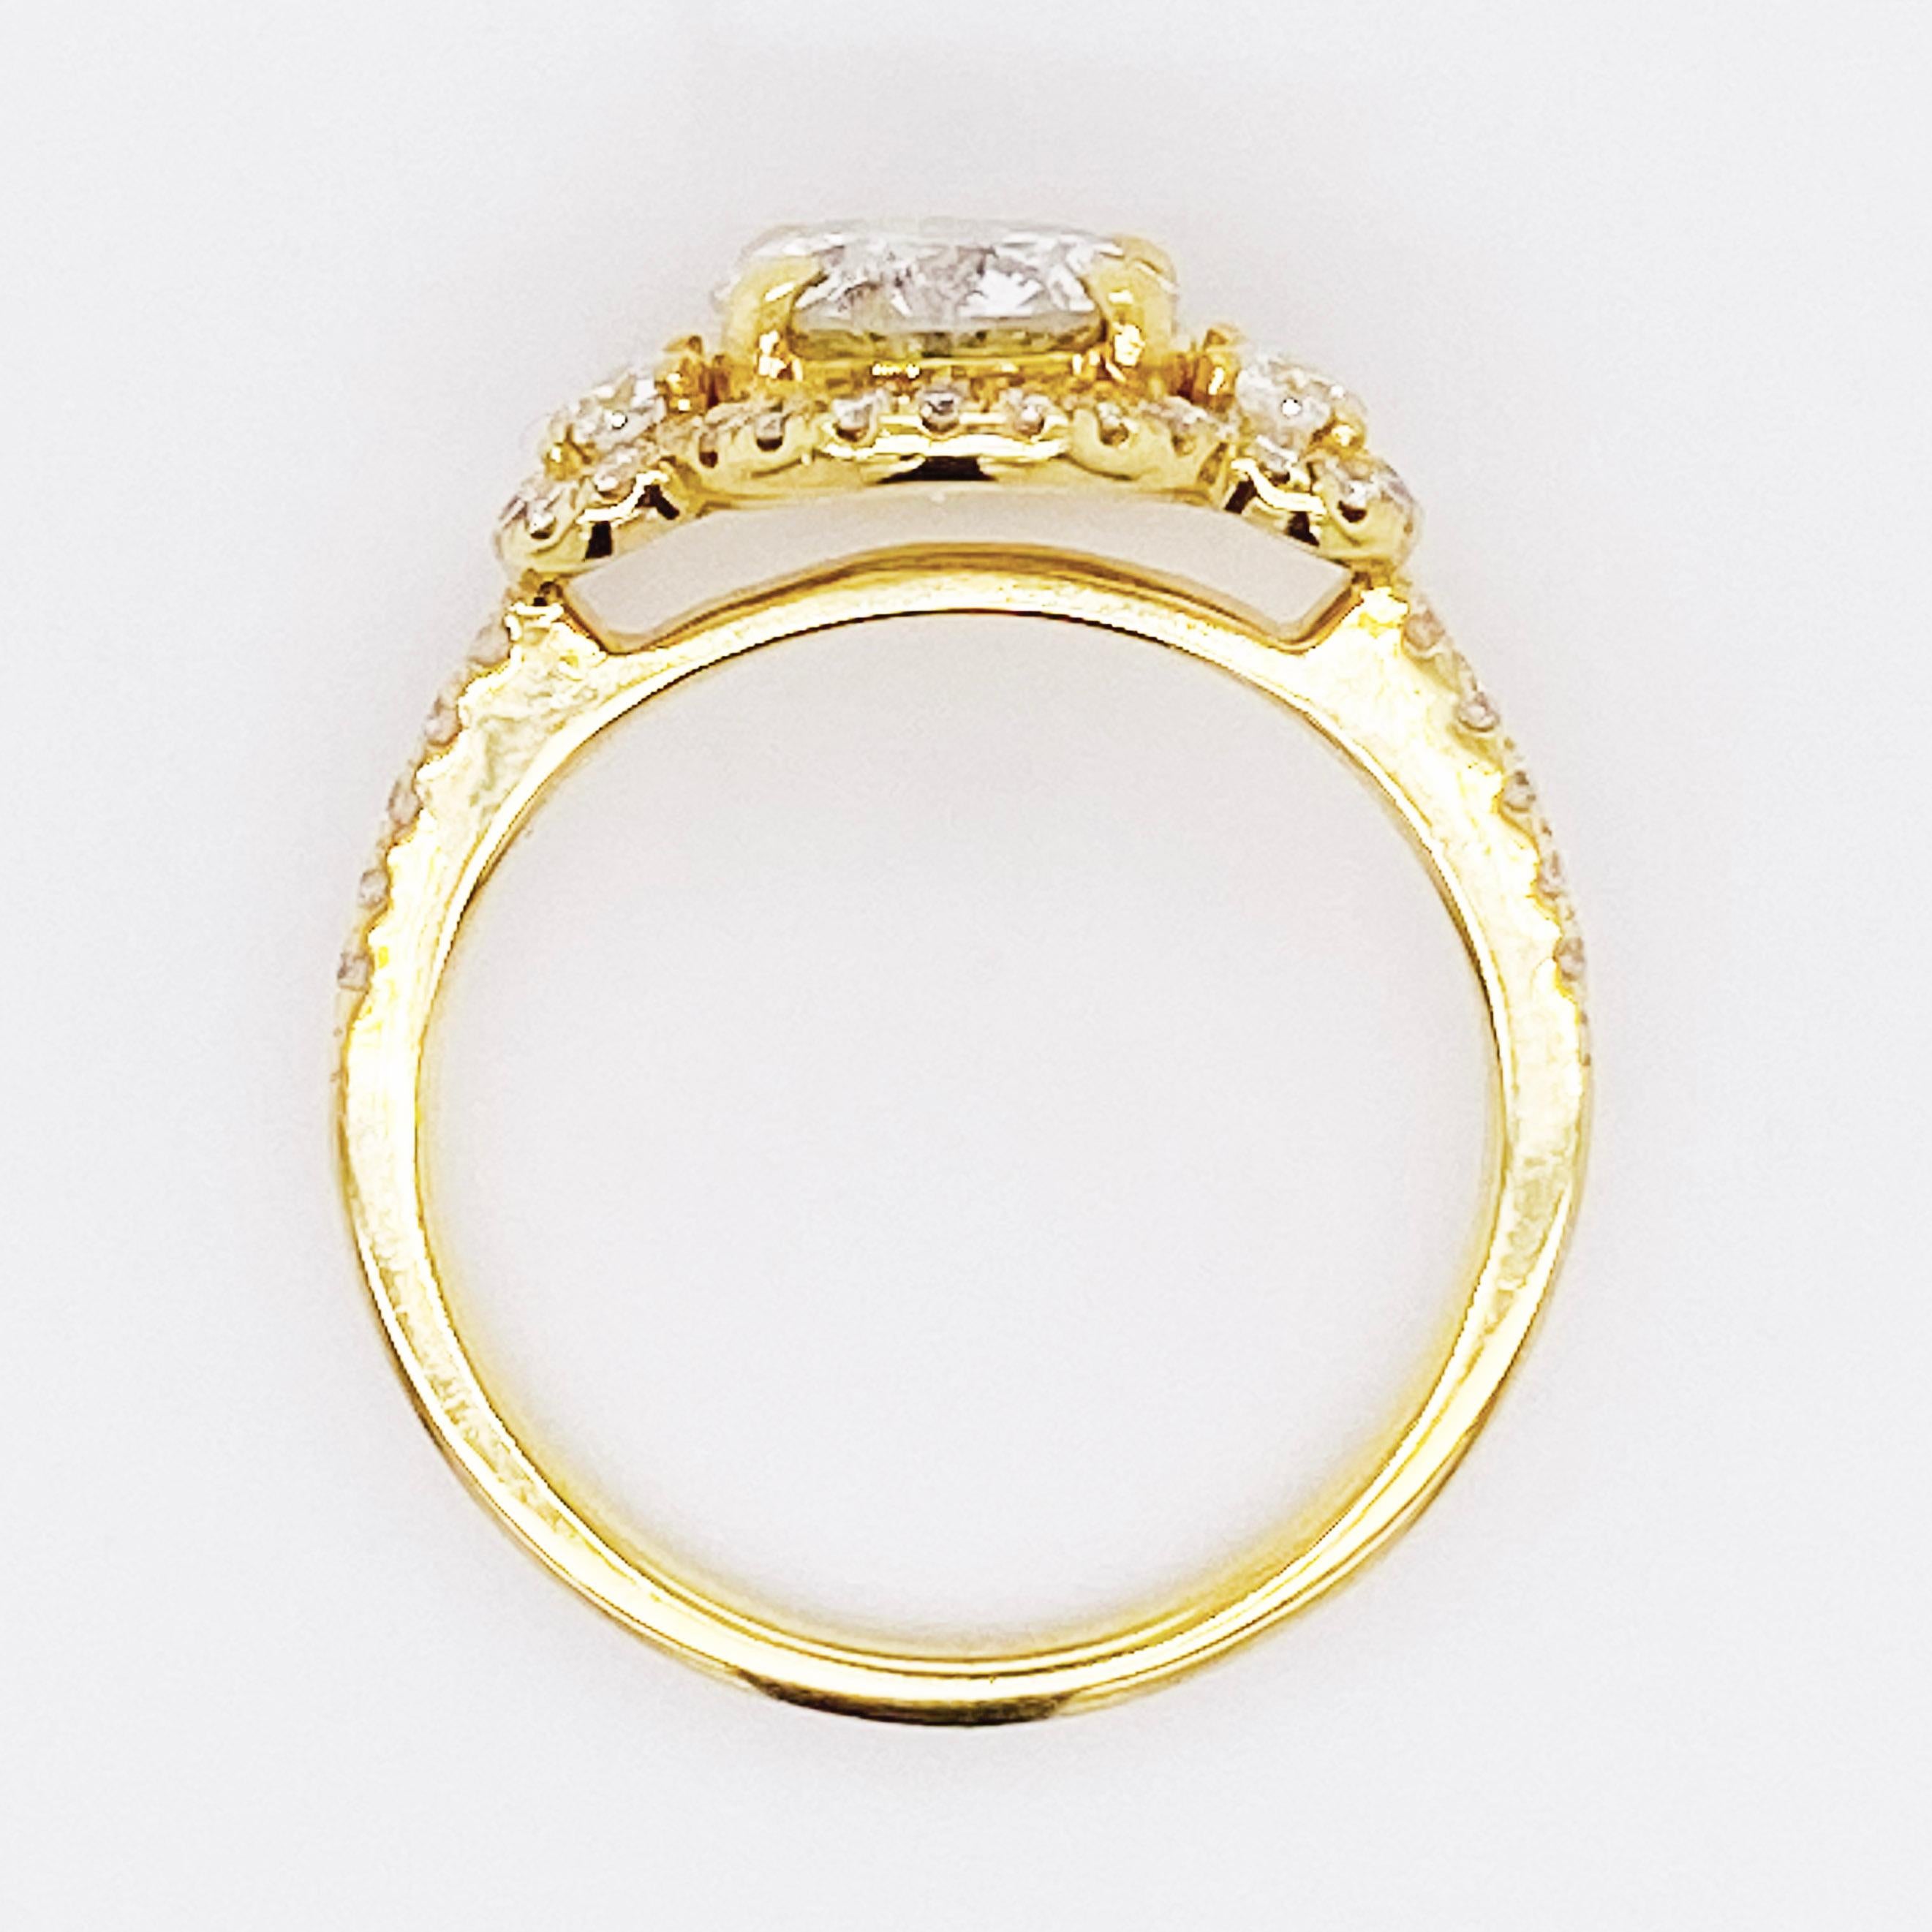 2.25 Carat Diamond Halo Diamond Ring, Three-Stone Ring, 18K Gold In New Condition For Sale In Austin, TX